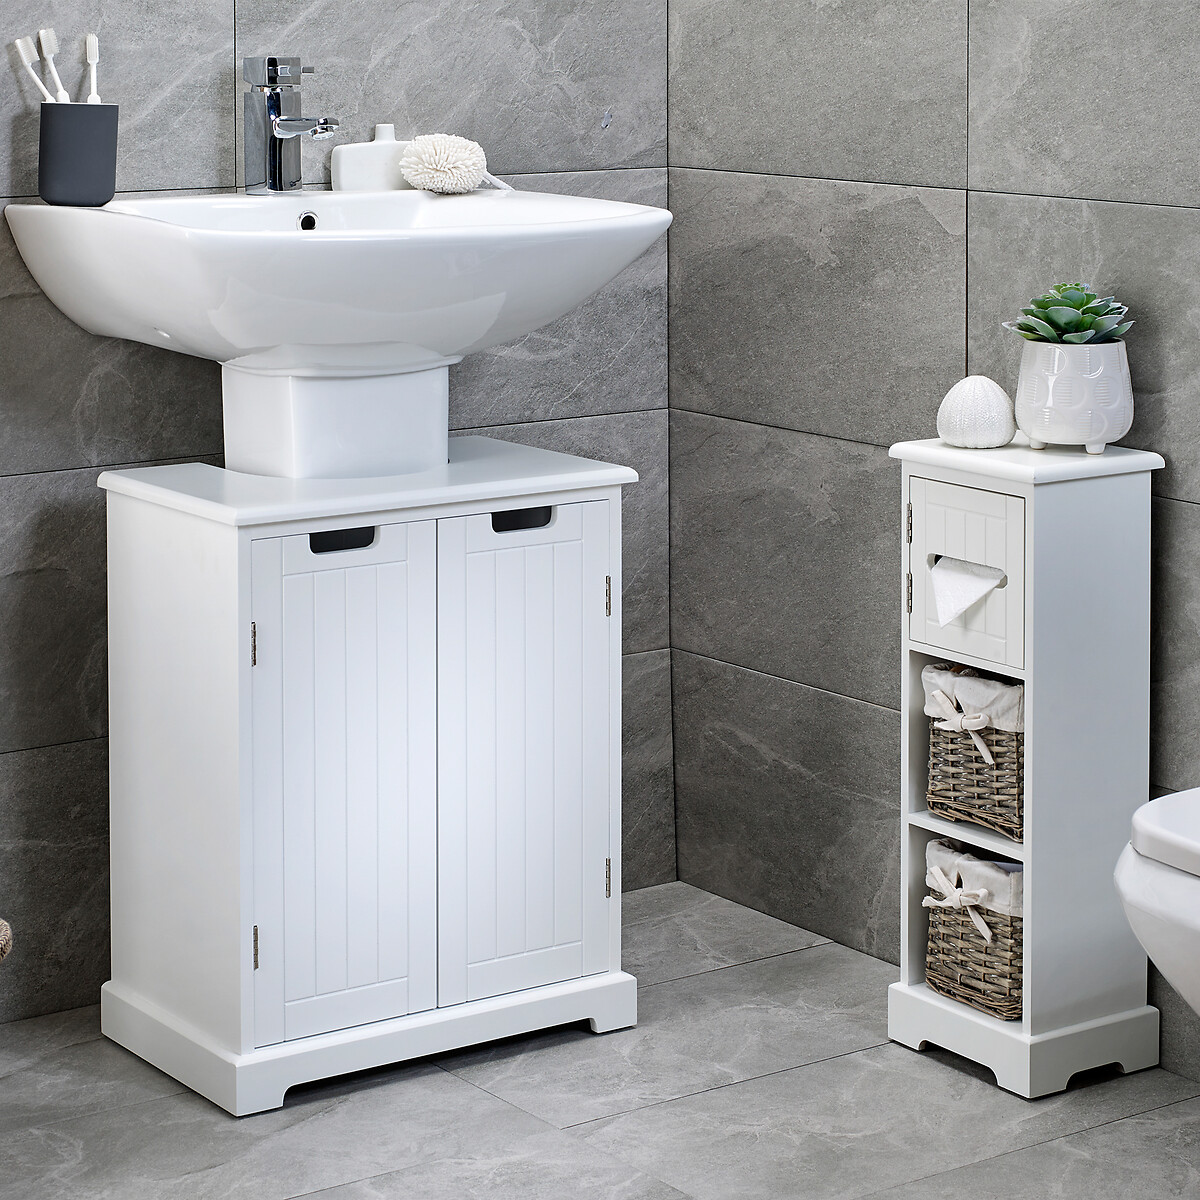 Tongue and groove under basin So'home | La Redoute